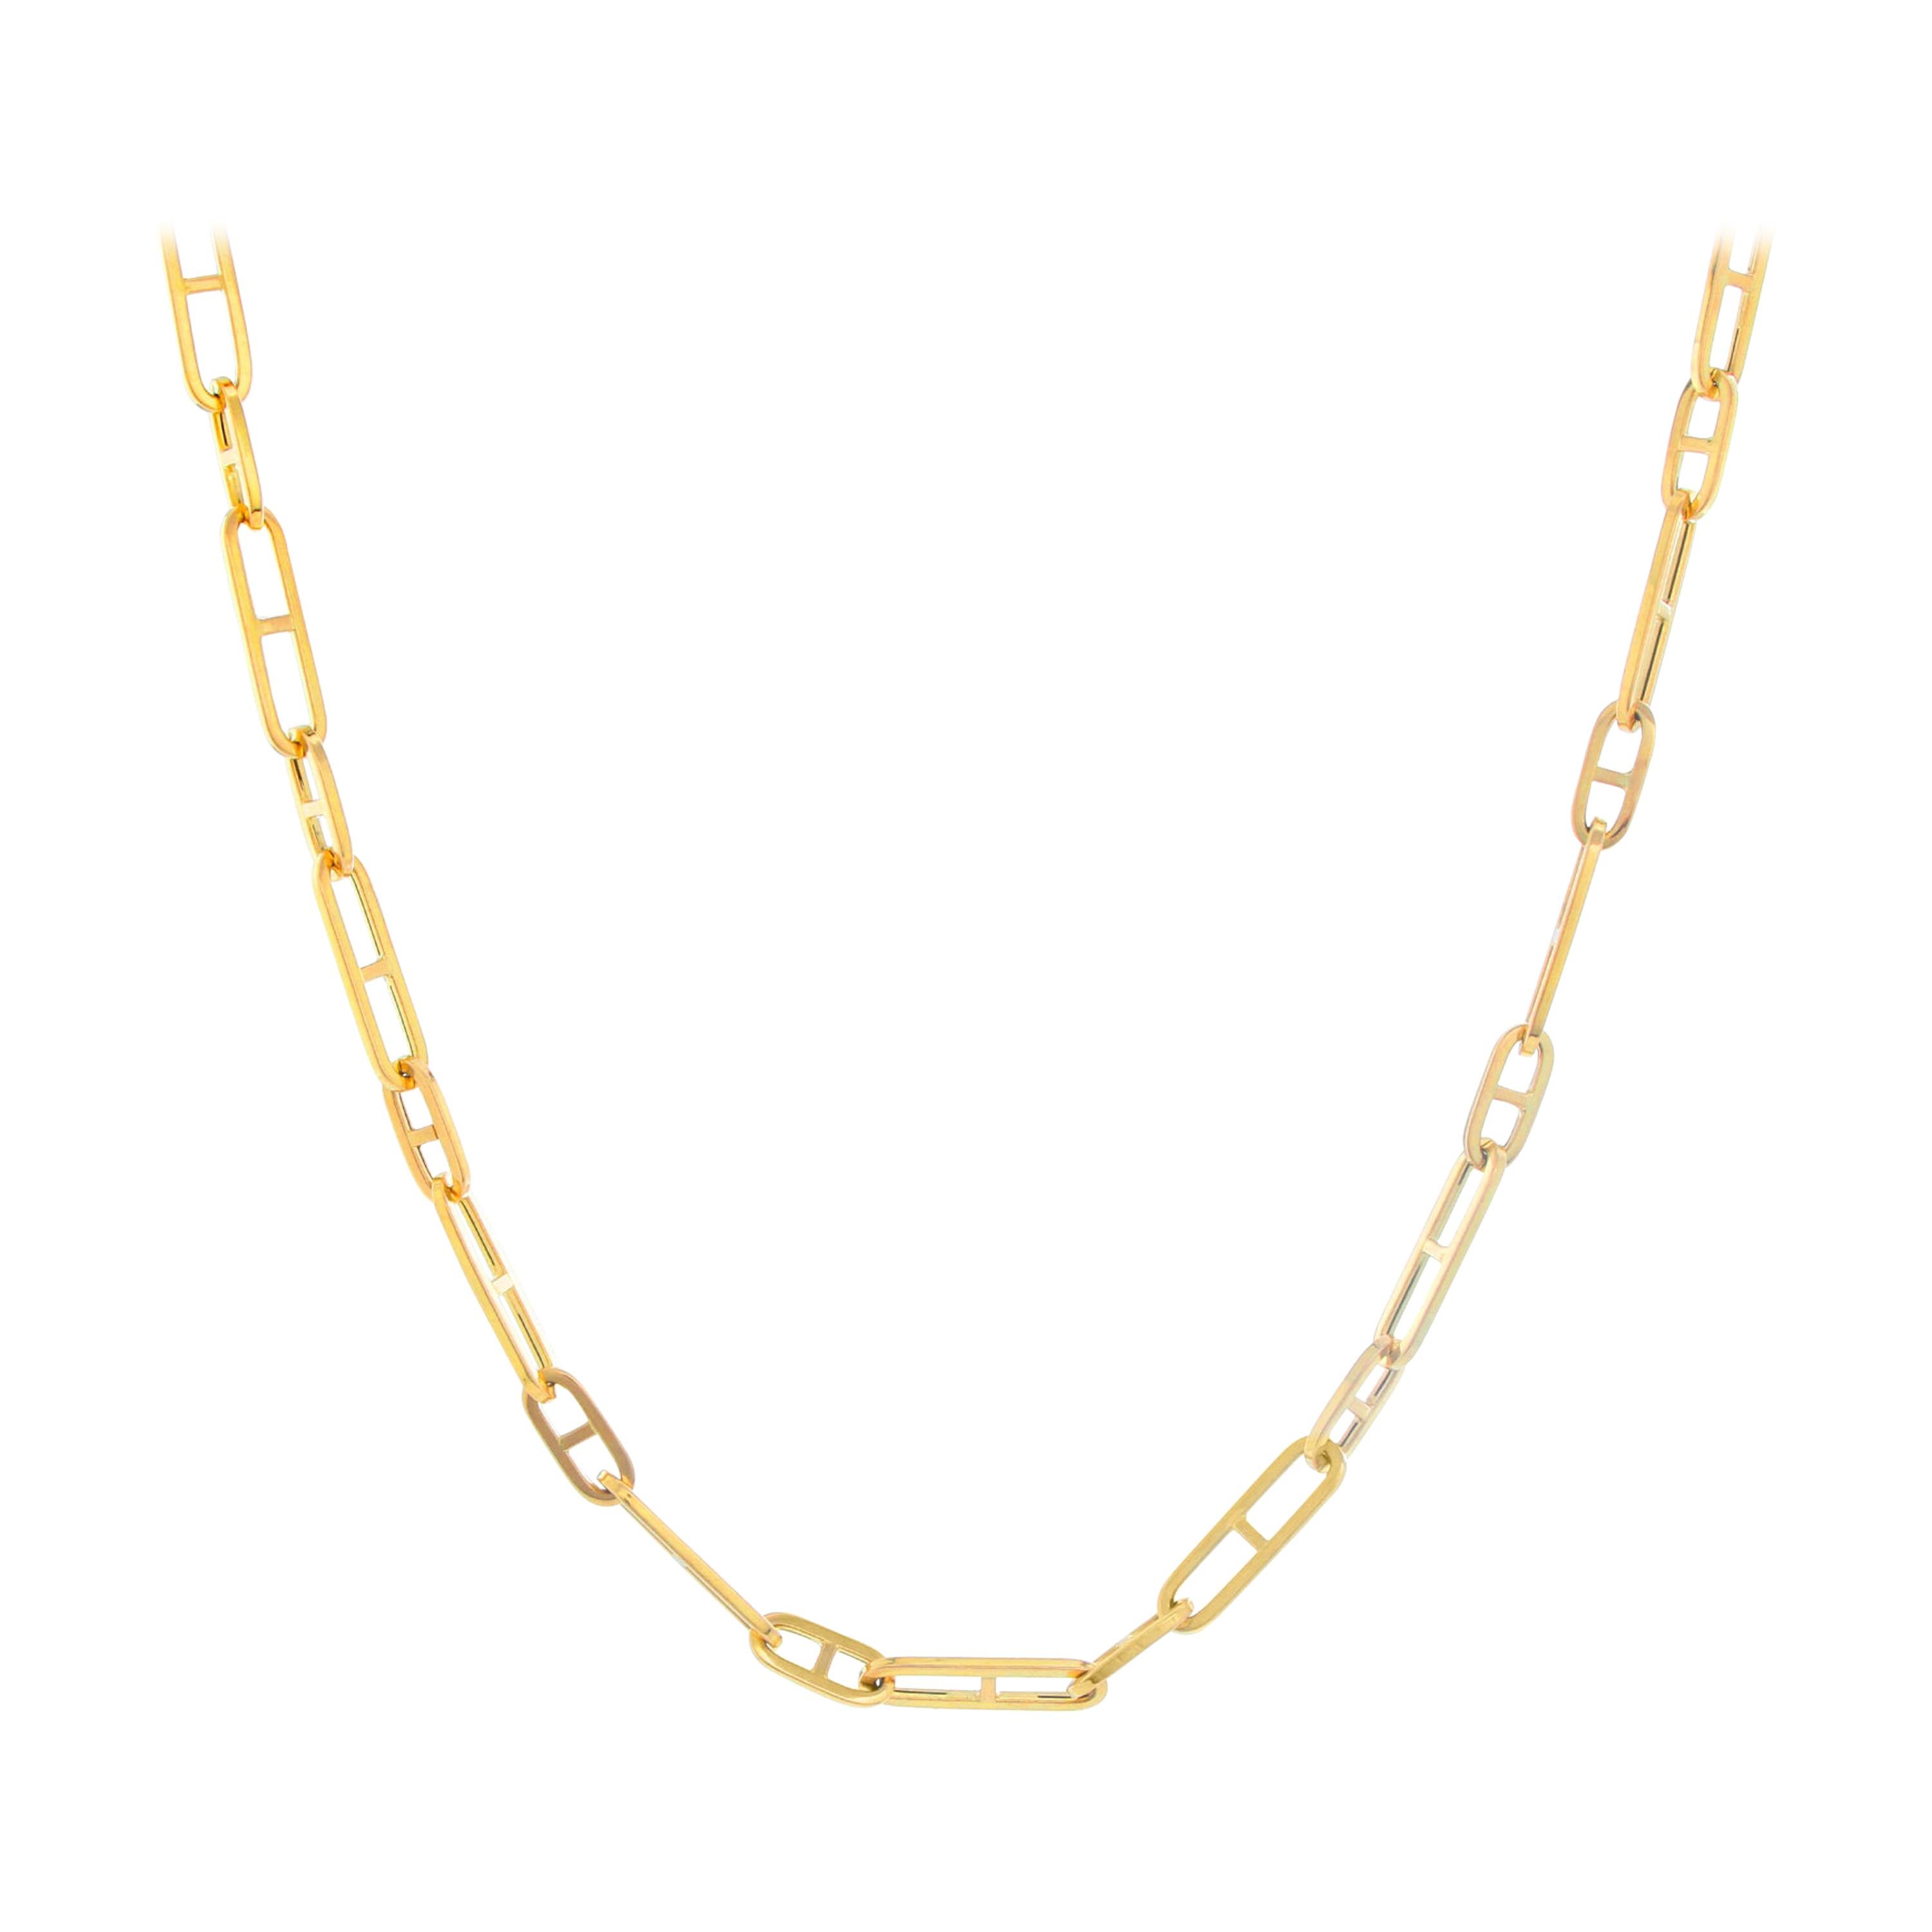 14 Karat Yellow Gold Mariner Link with Bar Chain Necklace